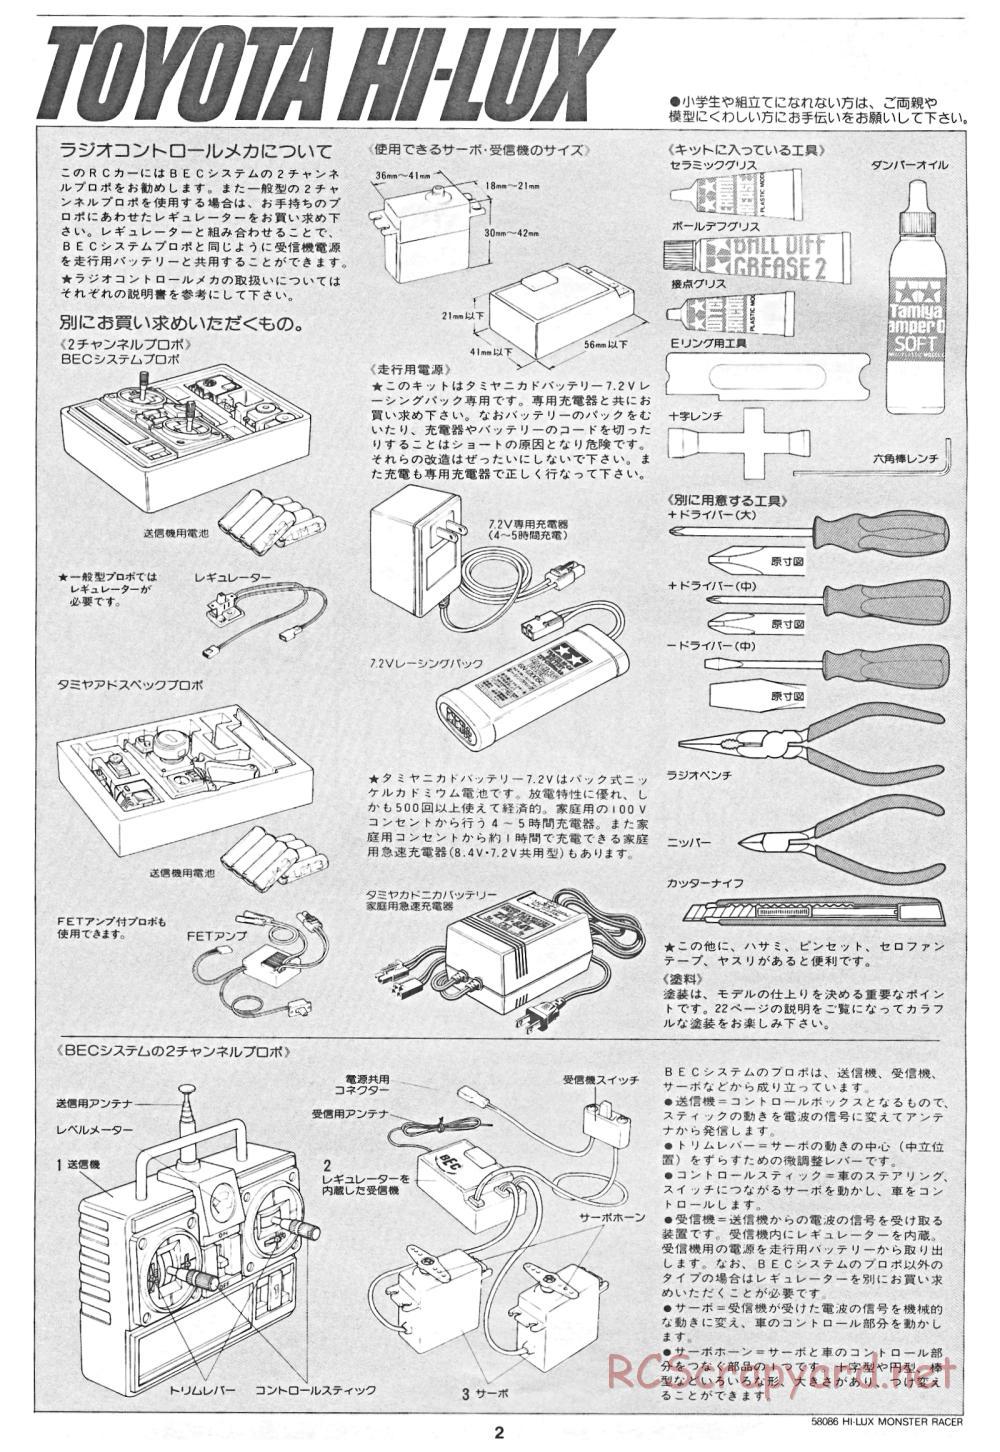 Tamiya - Toyota Hilux Monster Racer - 58086 - Manual - Page 2